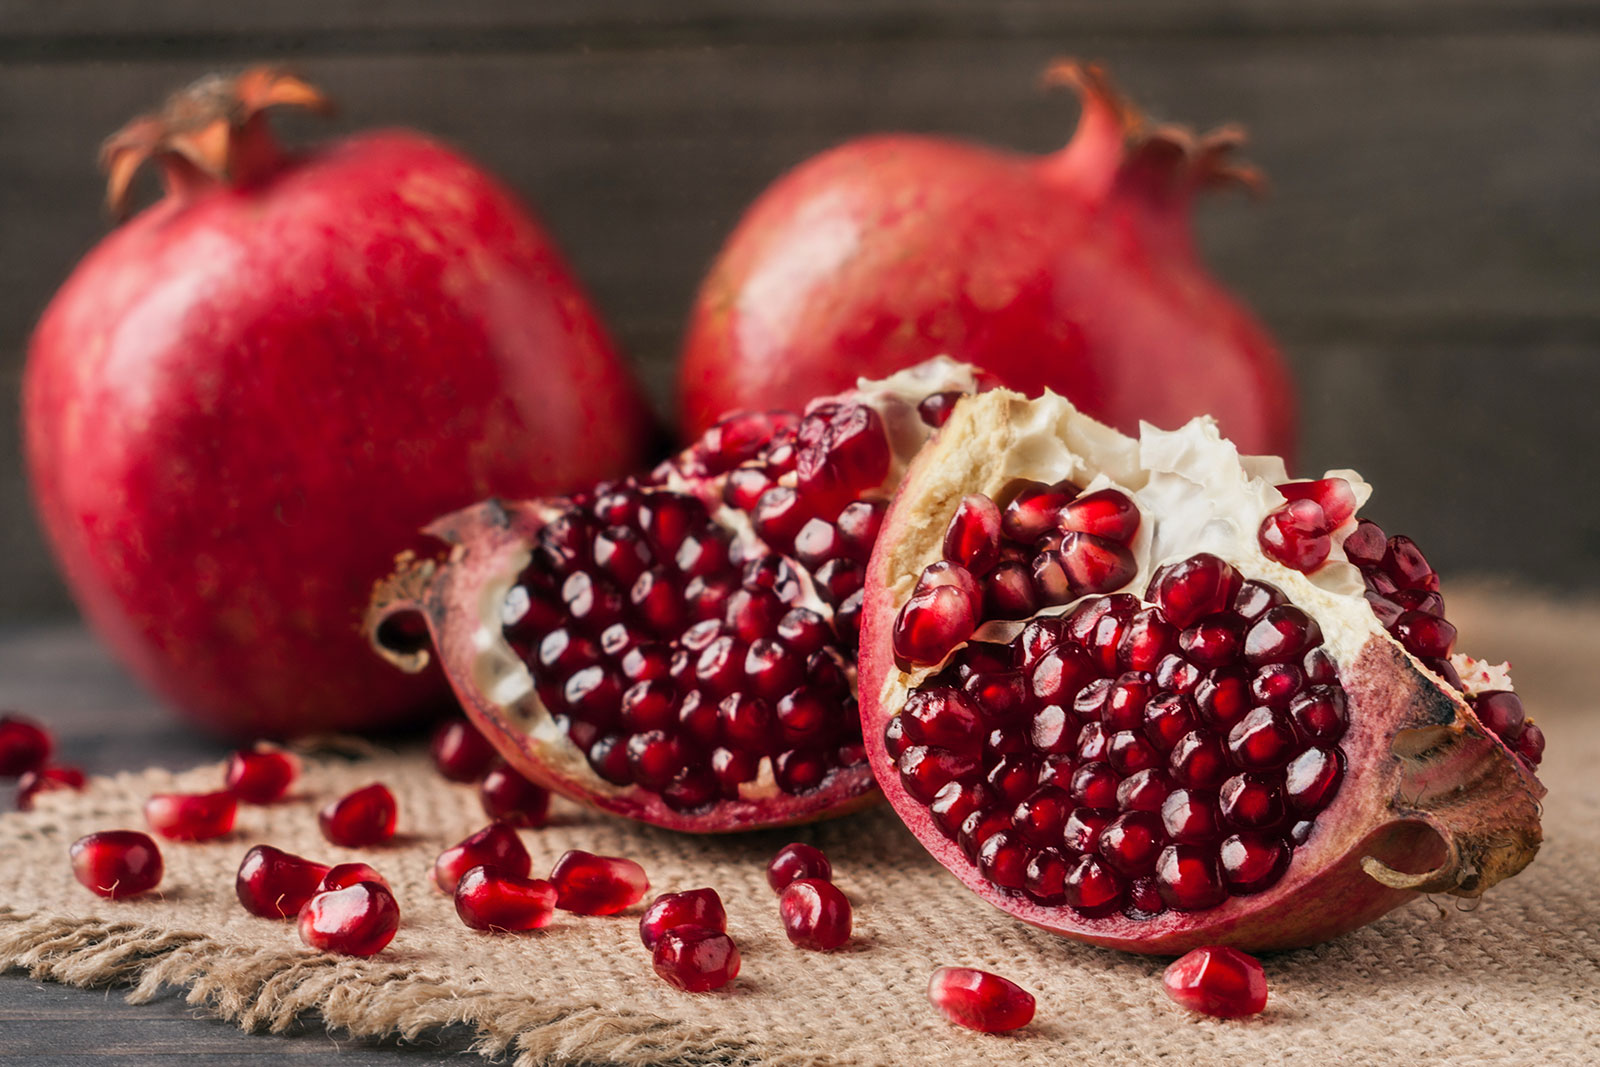 🍓 Sorry, But If You Can’t Pass This Plural Word Test, You Can Never Have Fruits Again Pomegranate